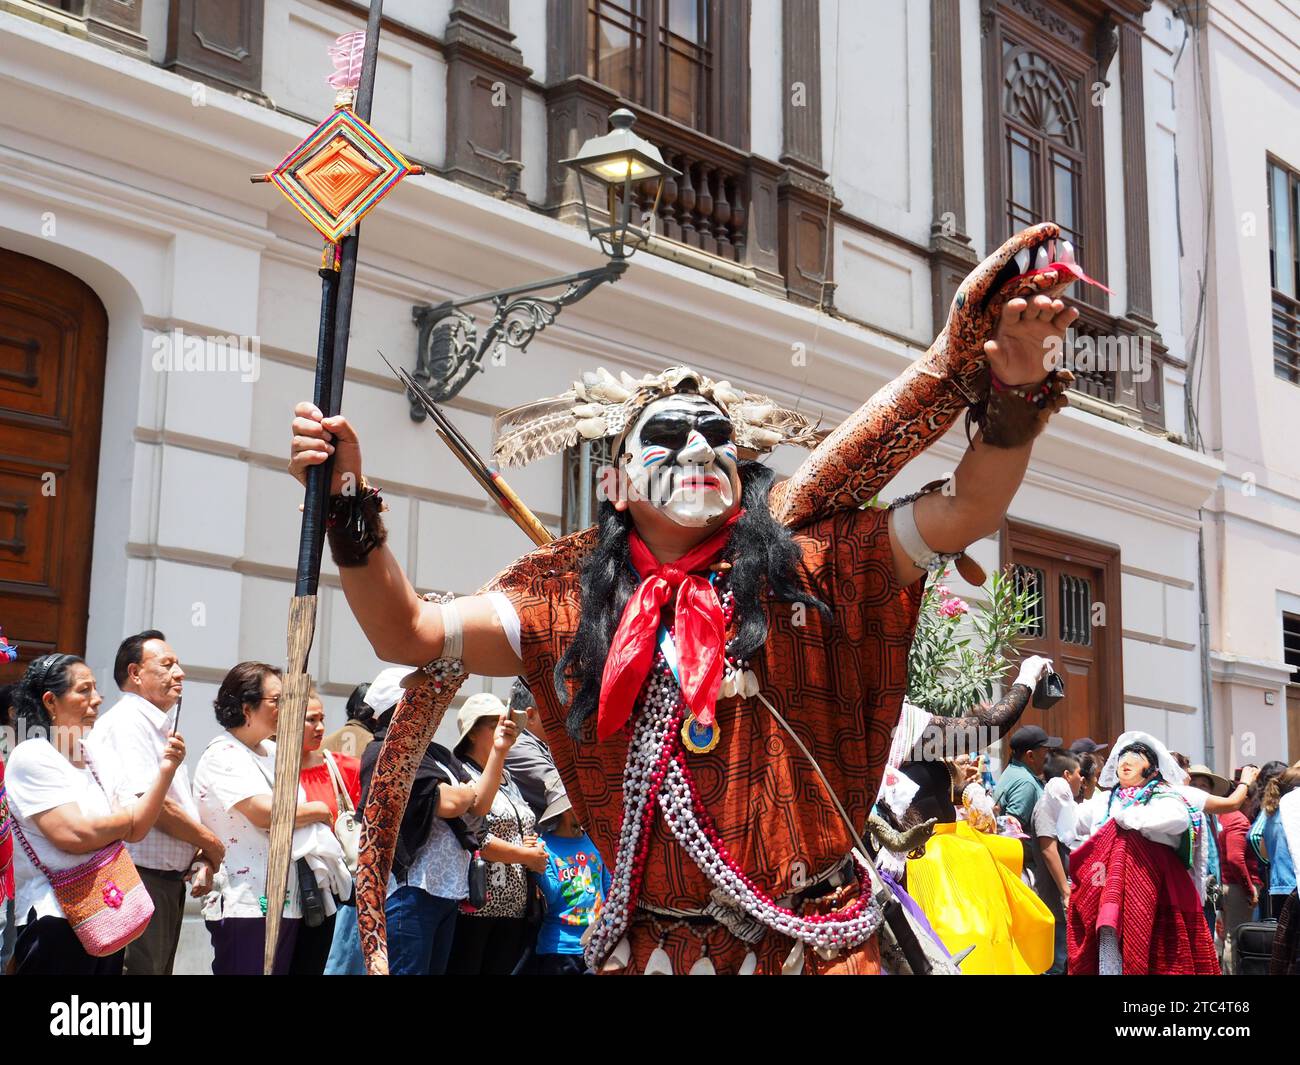 Man with mask and amazon spear from an indigenous Peruvian folk dance group performing through the streets of the historic center of Lima as part of the Municipality of Lima program to disseminate the Andean cultural heritage. Stock Photo